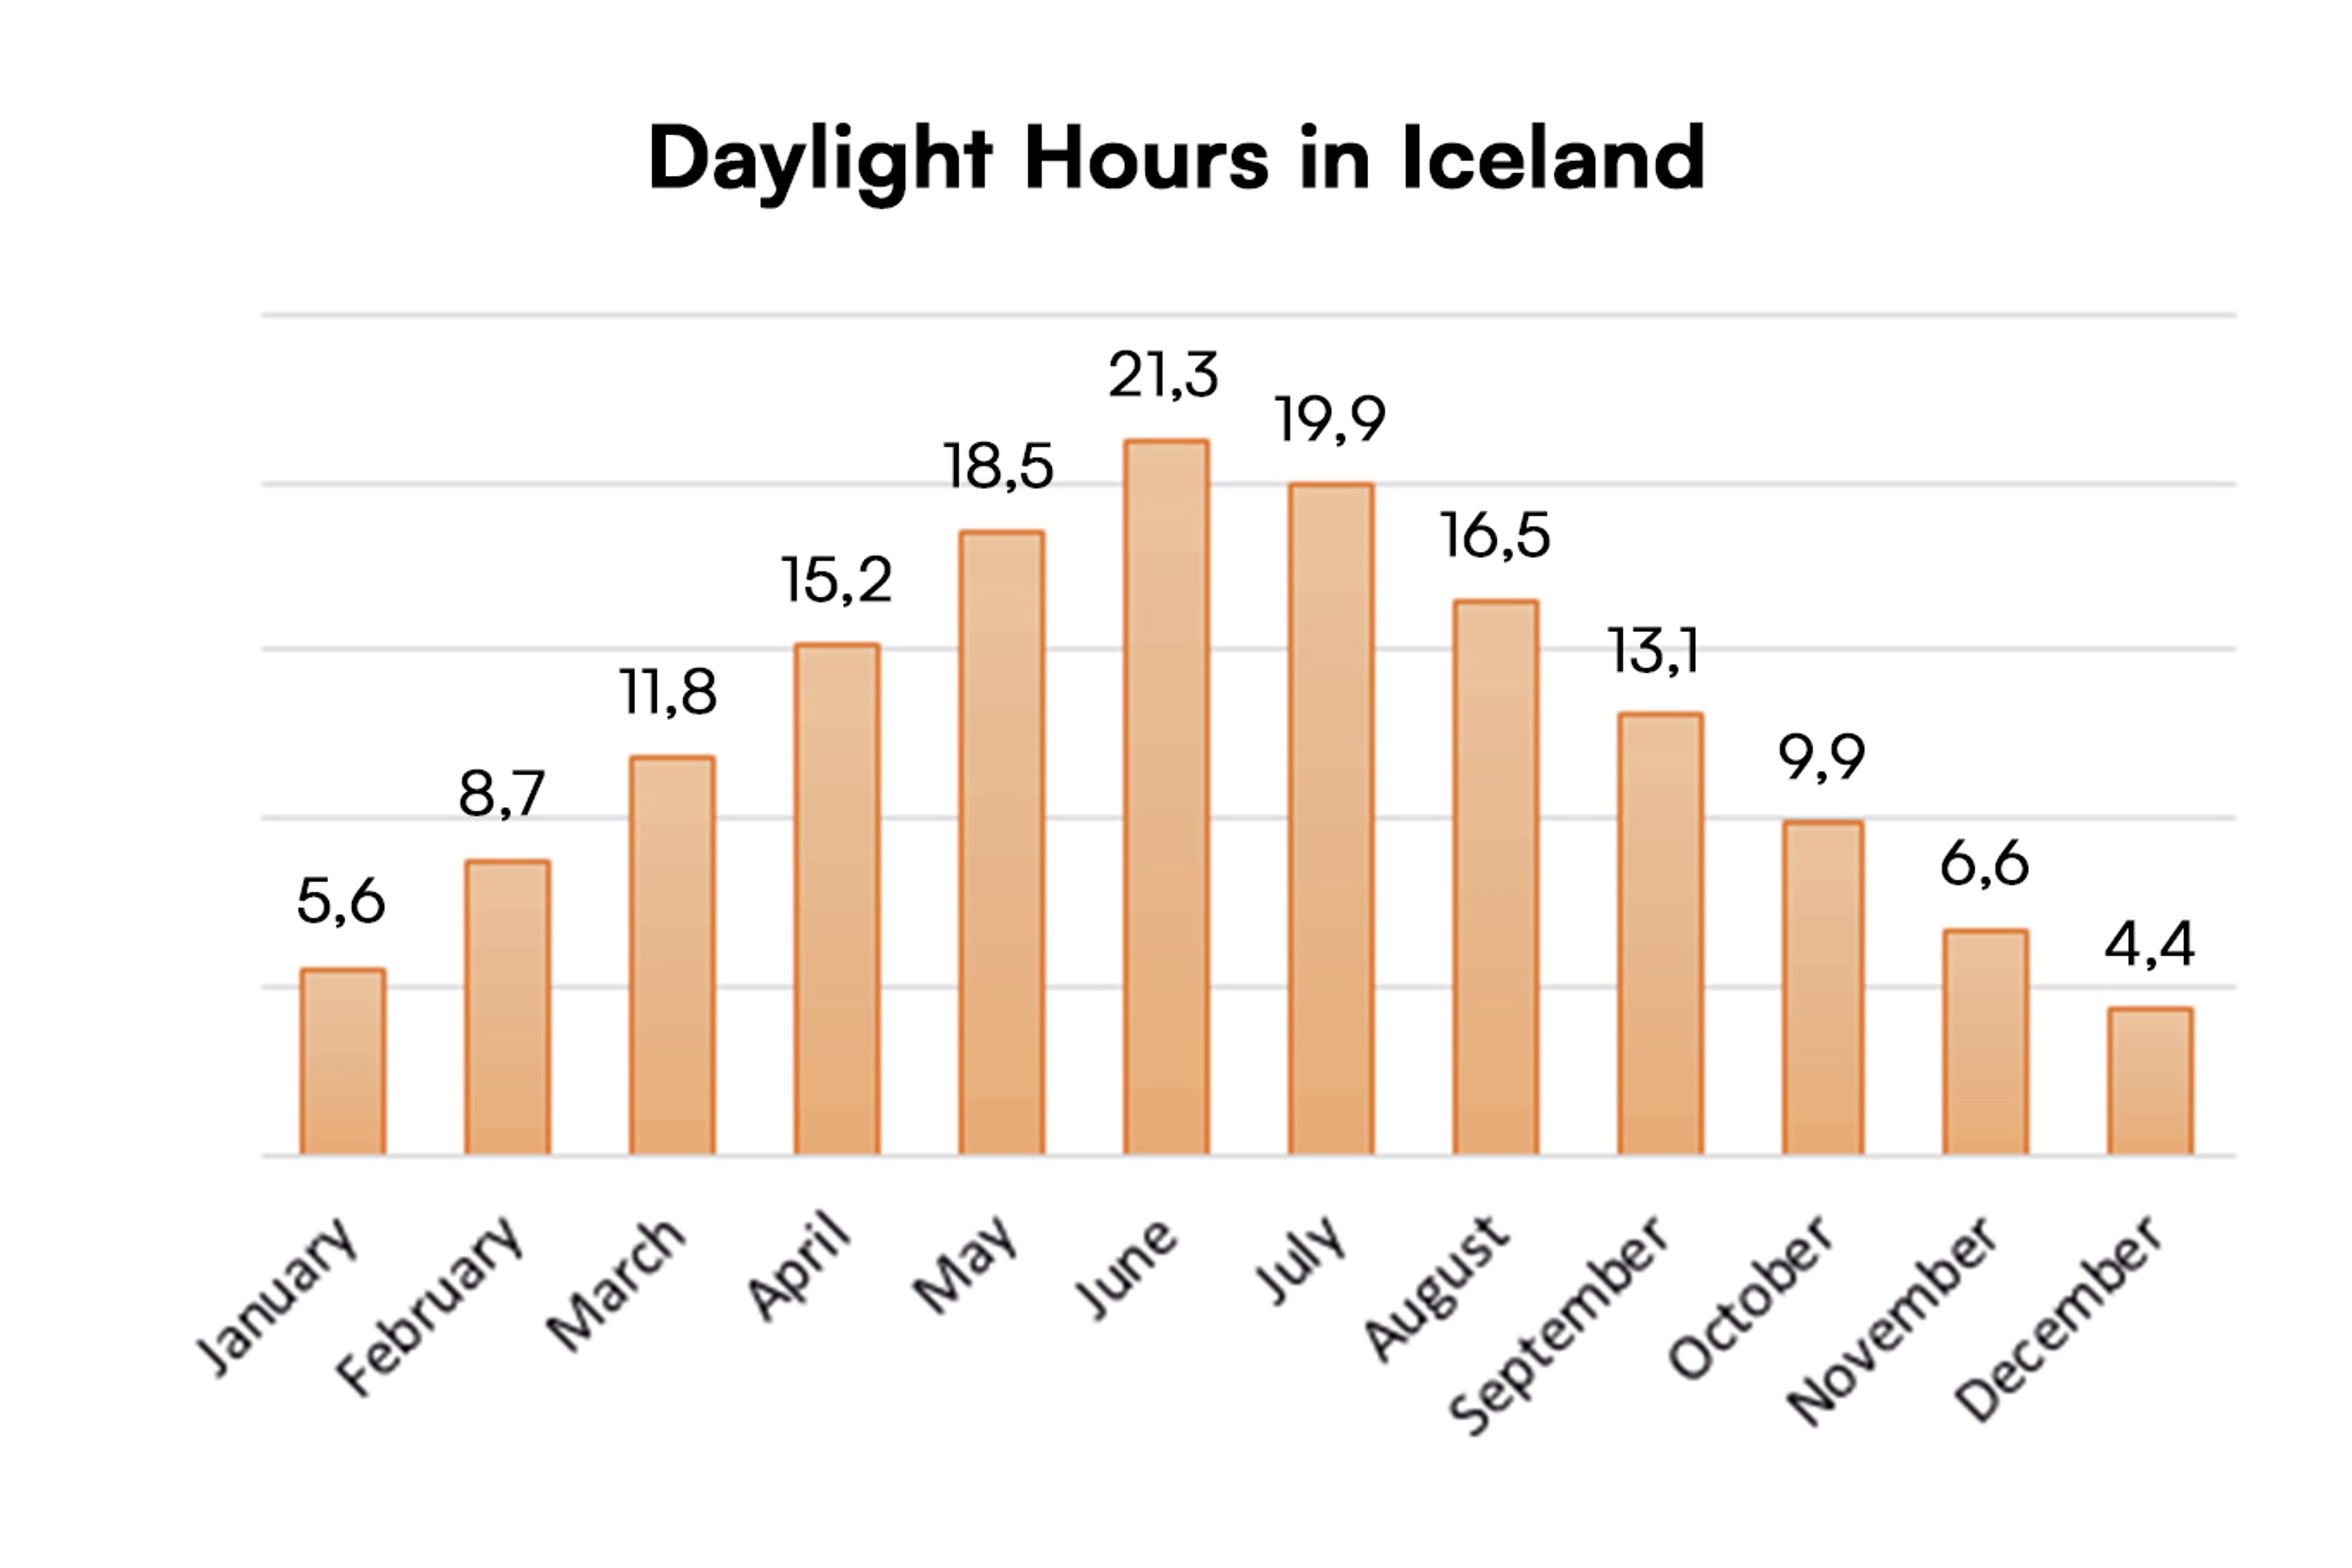 Daylight hours in iceland